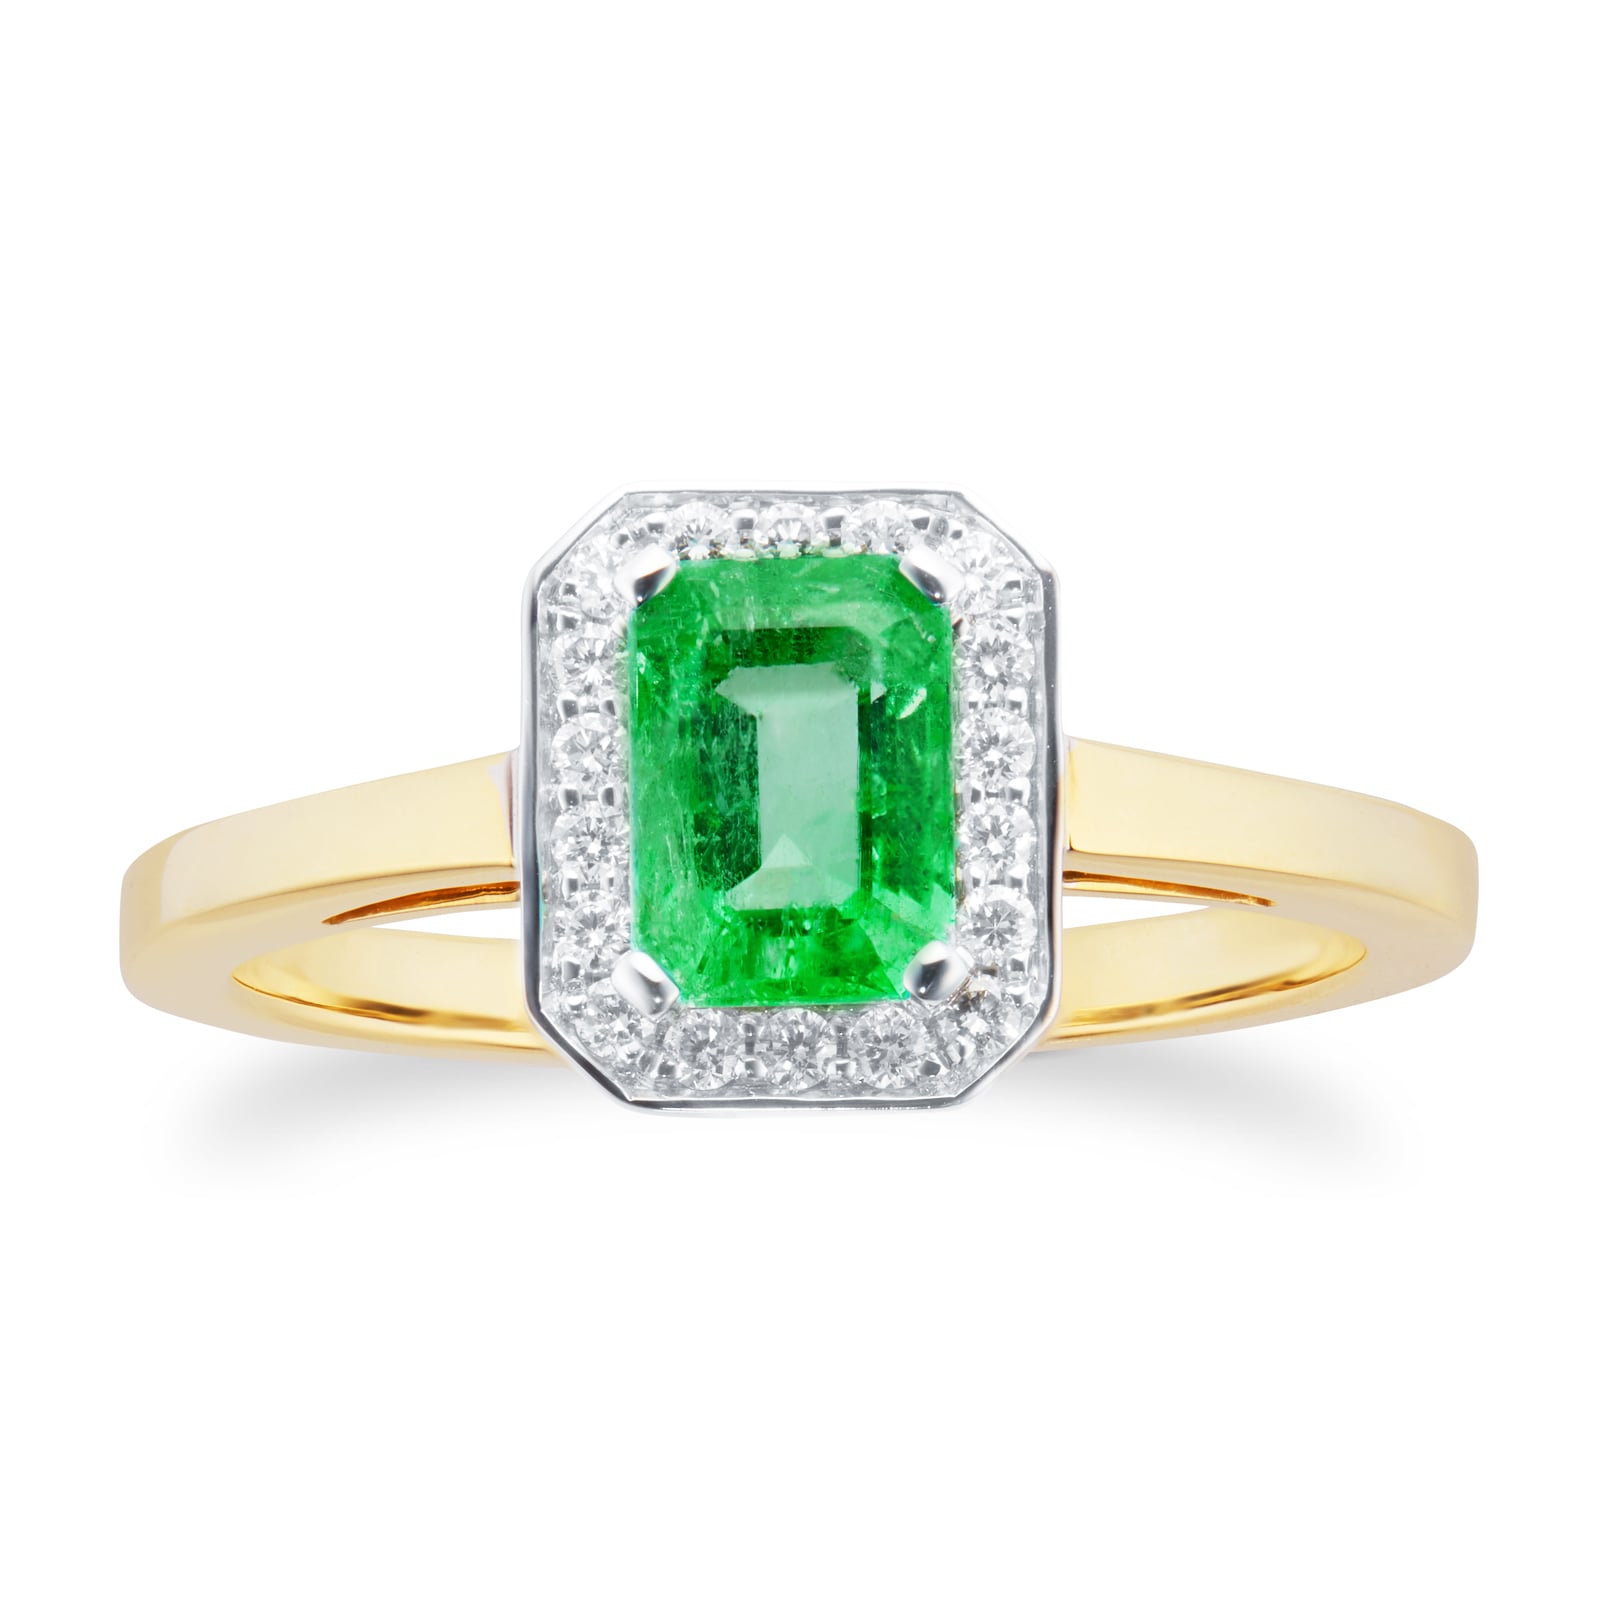 18ct Yellow and White Gold Emerald and Diamond Halo Ring - Ring Size J.5